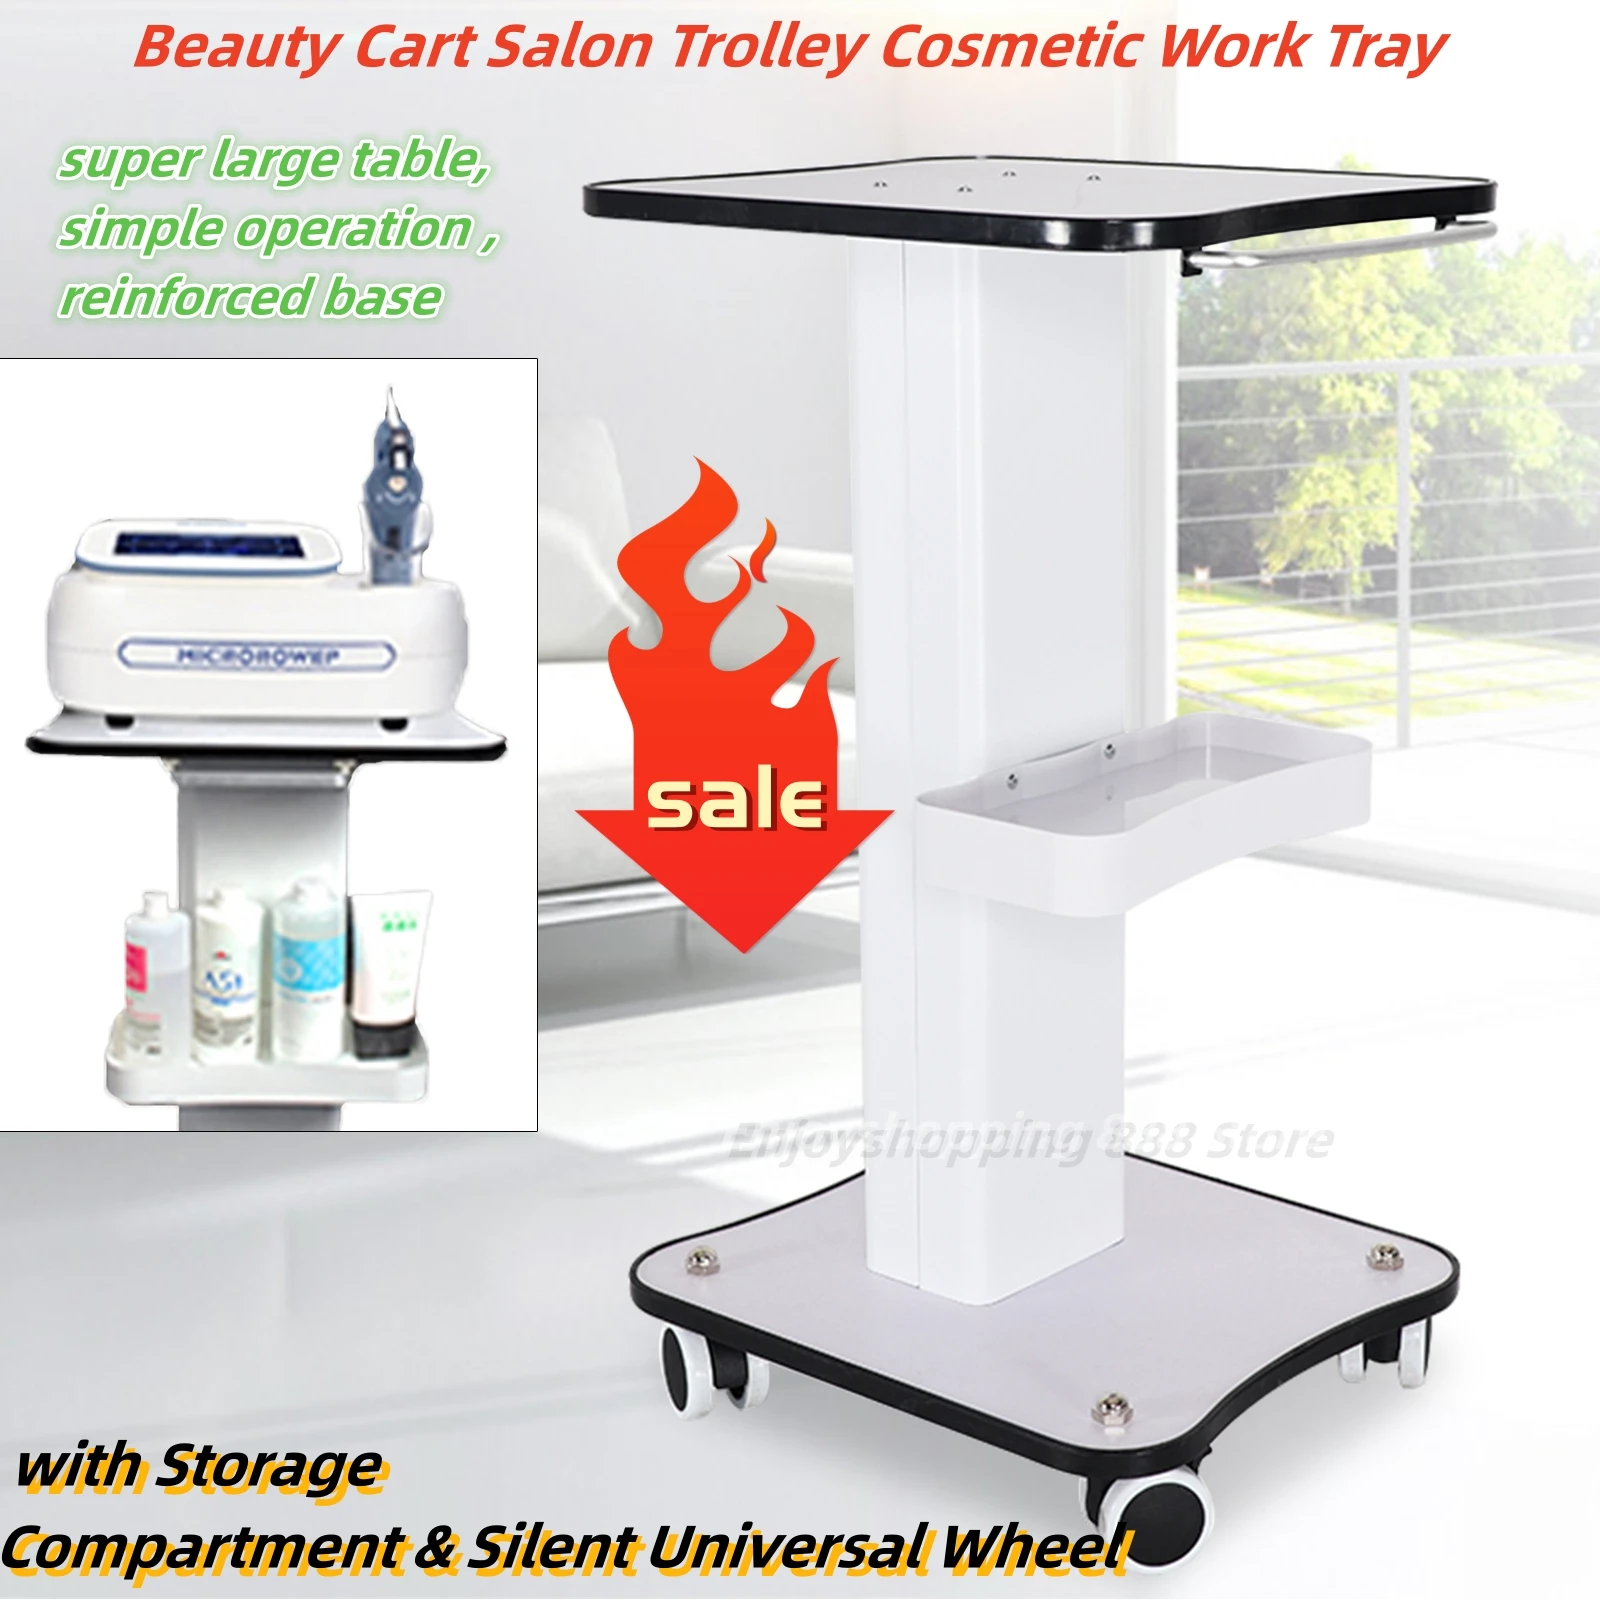 Beauty Cart Salon Trolley Cosmetic Work Tray with Storage Compartment & Silent Universal Wheel 1pc 4 inch medical tpr replacement universal wheel single wheel silent rubber wheel beauty instrument replaceable caster